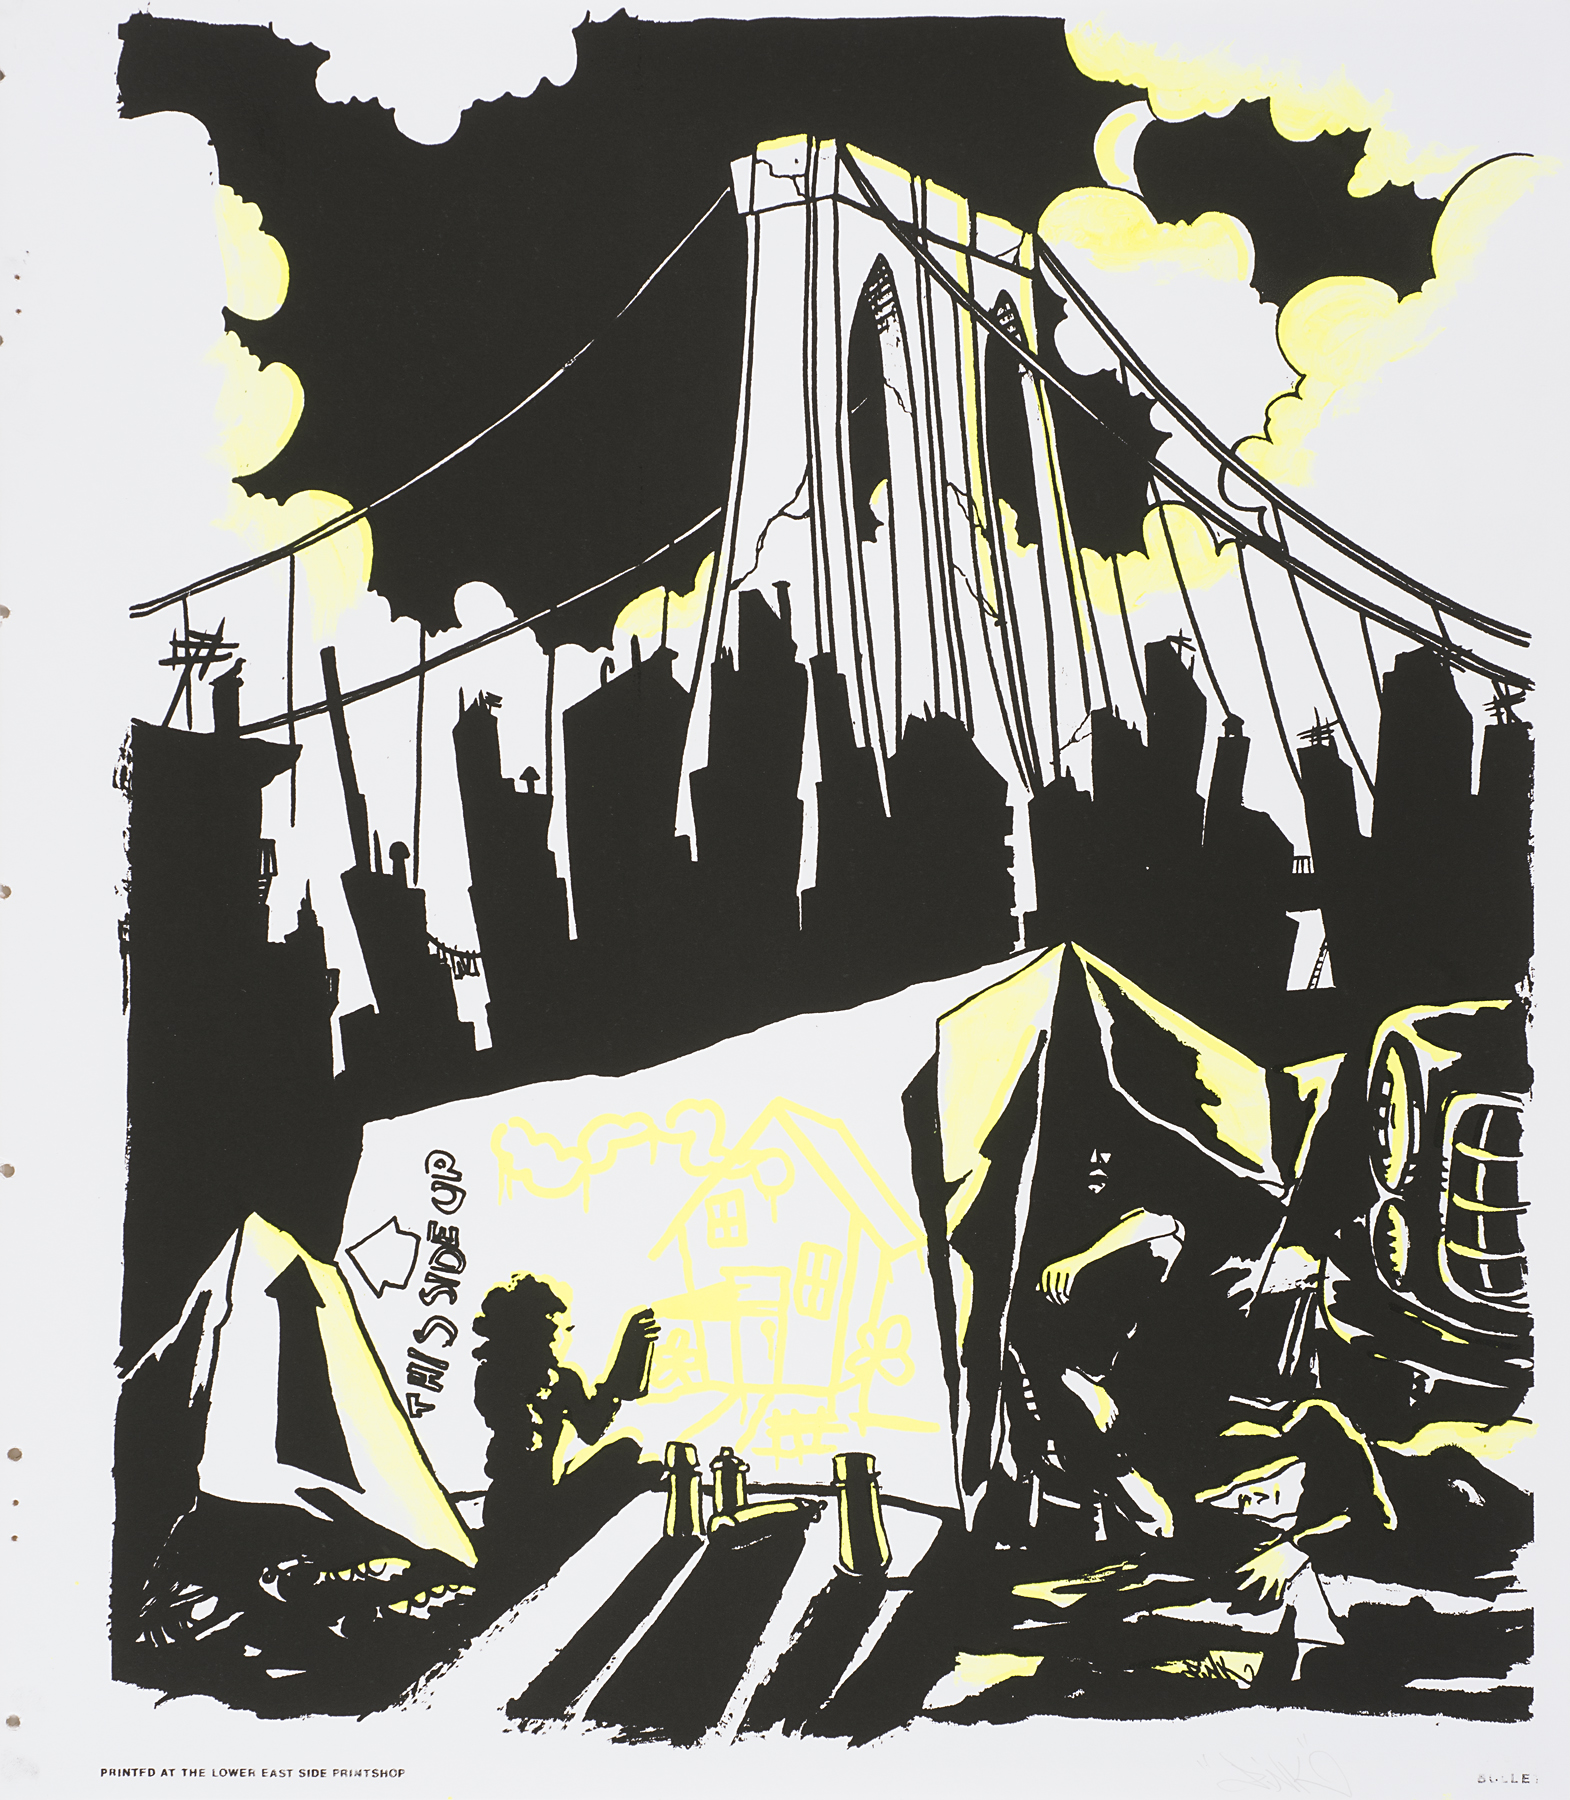 A cloud-filled night sky with the Brooklyn Bridge and skyscrapers fills the background. In the center of the foreground is a makeshift shelter with one person visible sitting inside and another spray painting an image on the outside. In bright yellow, the person draws an idealistic image of a house on the side of the shelter. 